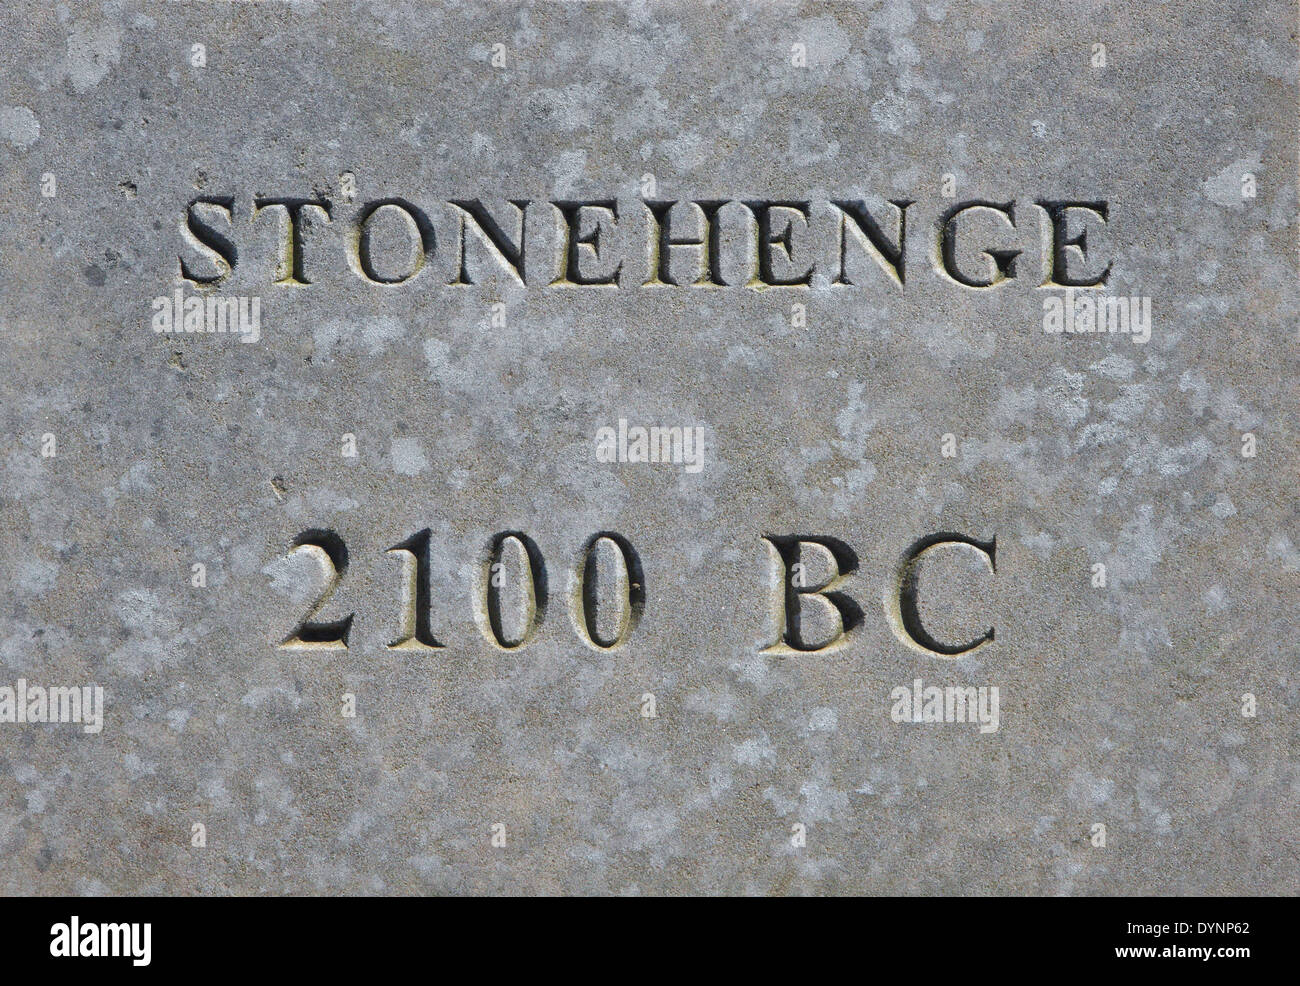 Stonehenge and date 2100 BC engraved in rock Stock Photo